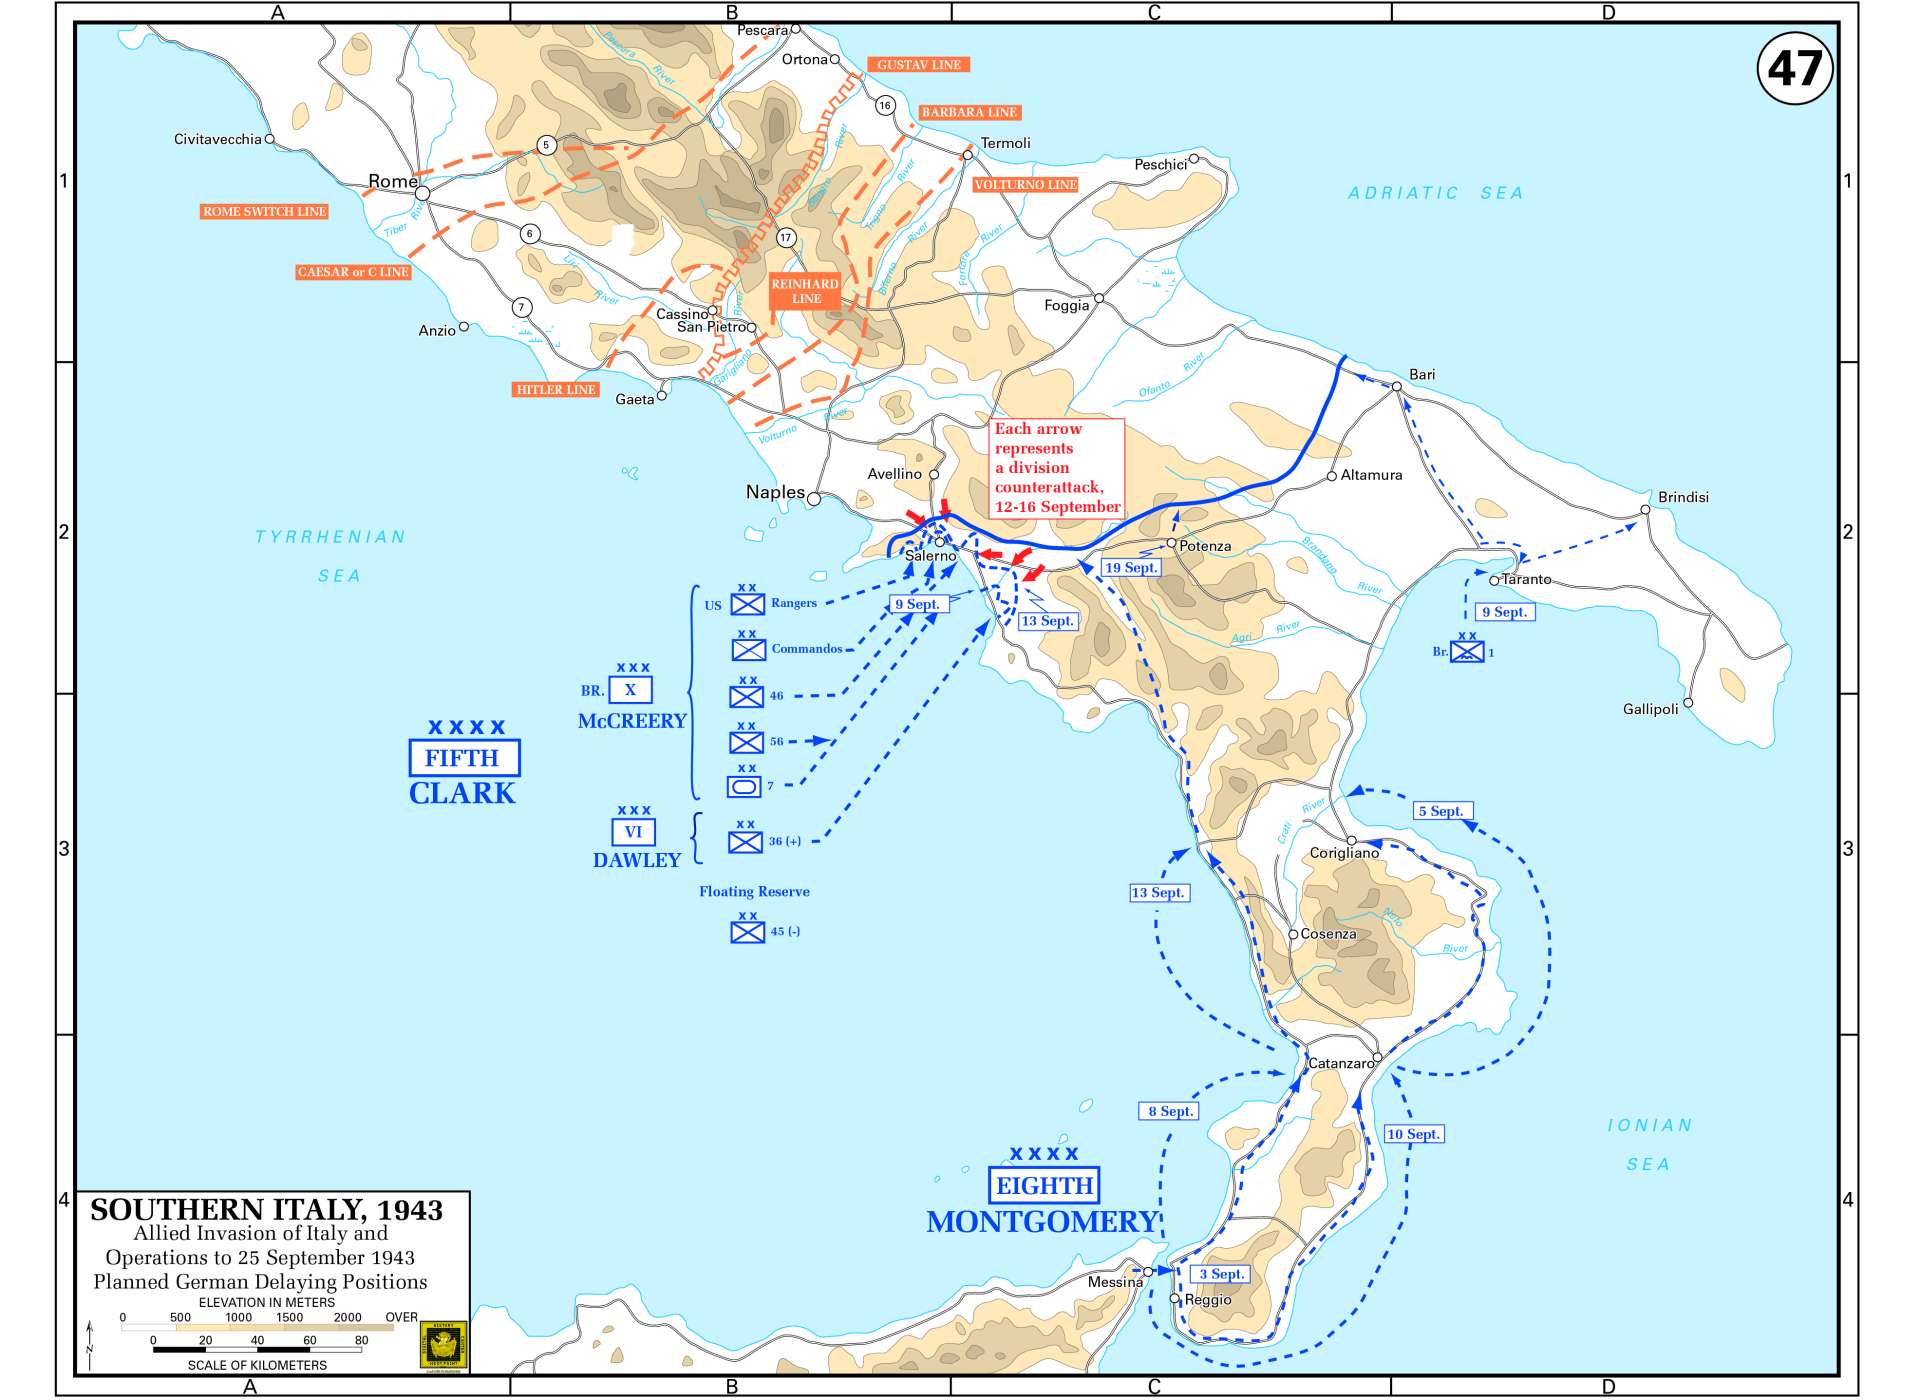 Map of Allied operations in southern Italy, September 3-25, 1943. Map courtesy of the United States Military Academy Department of History.